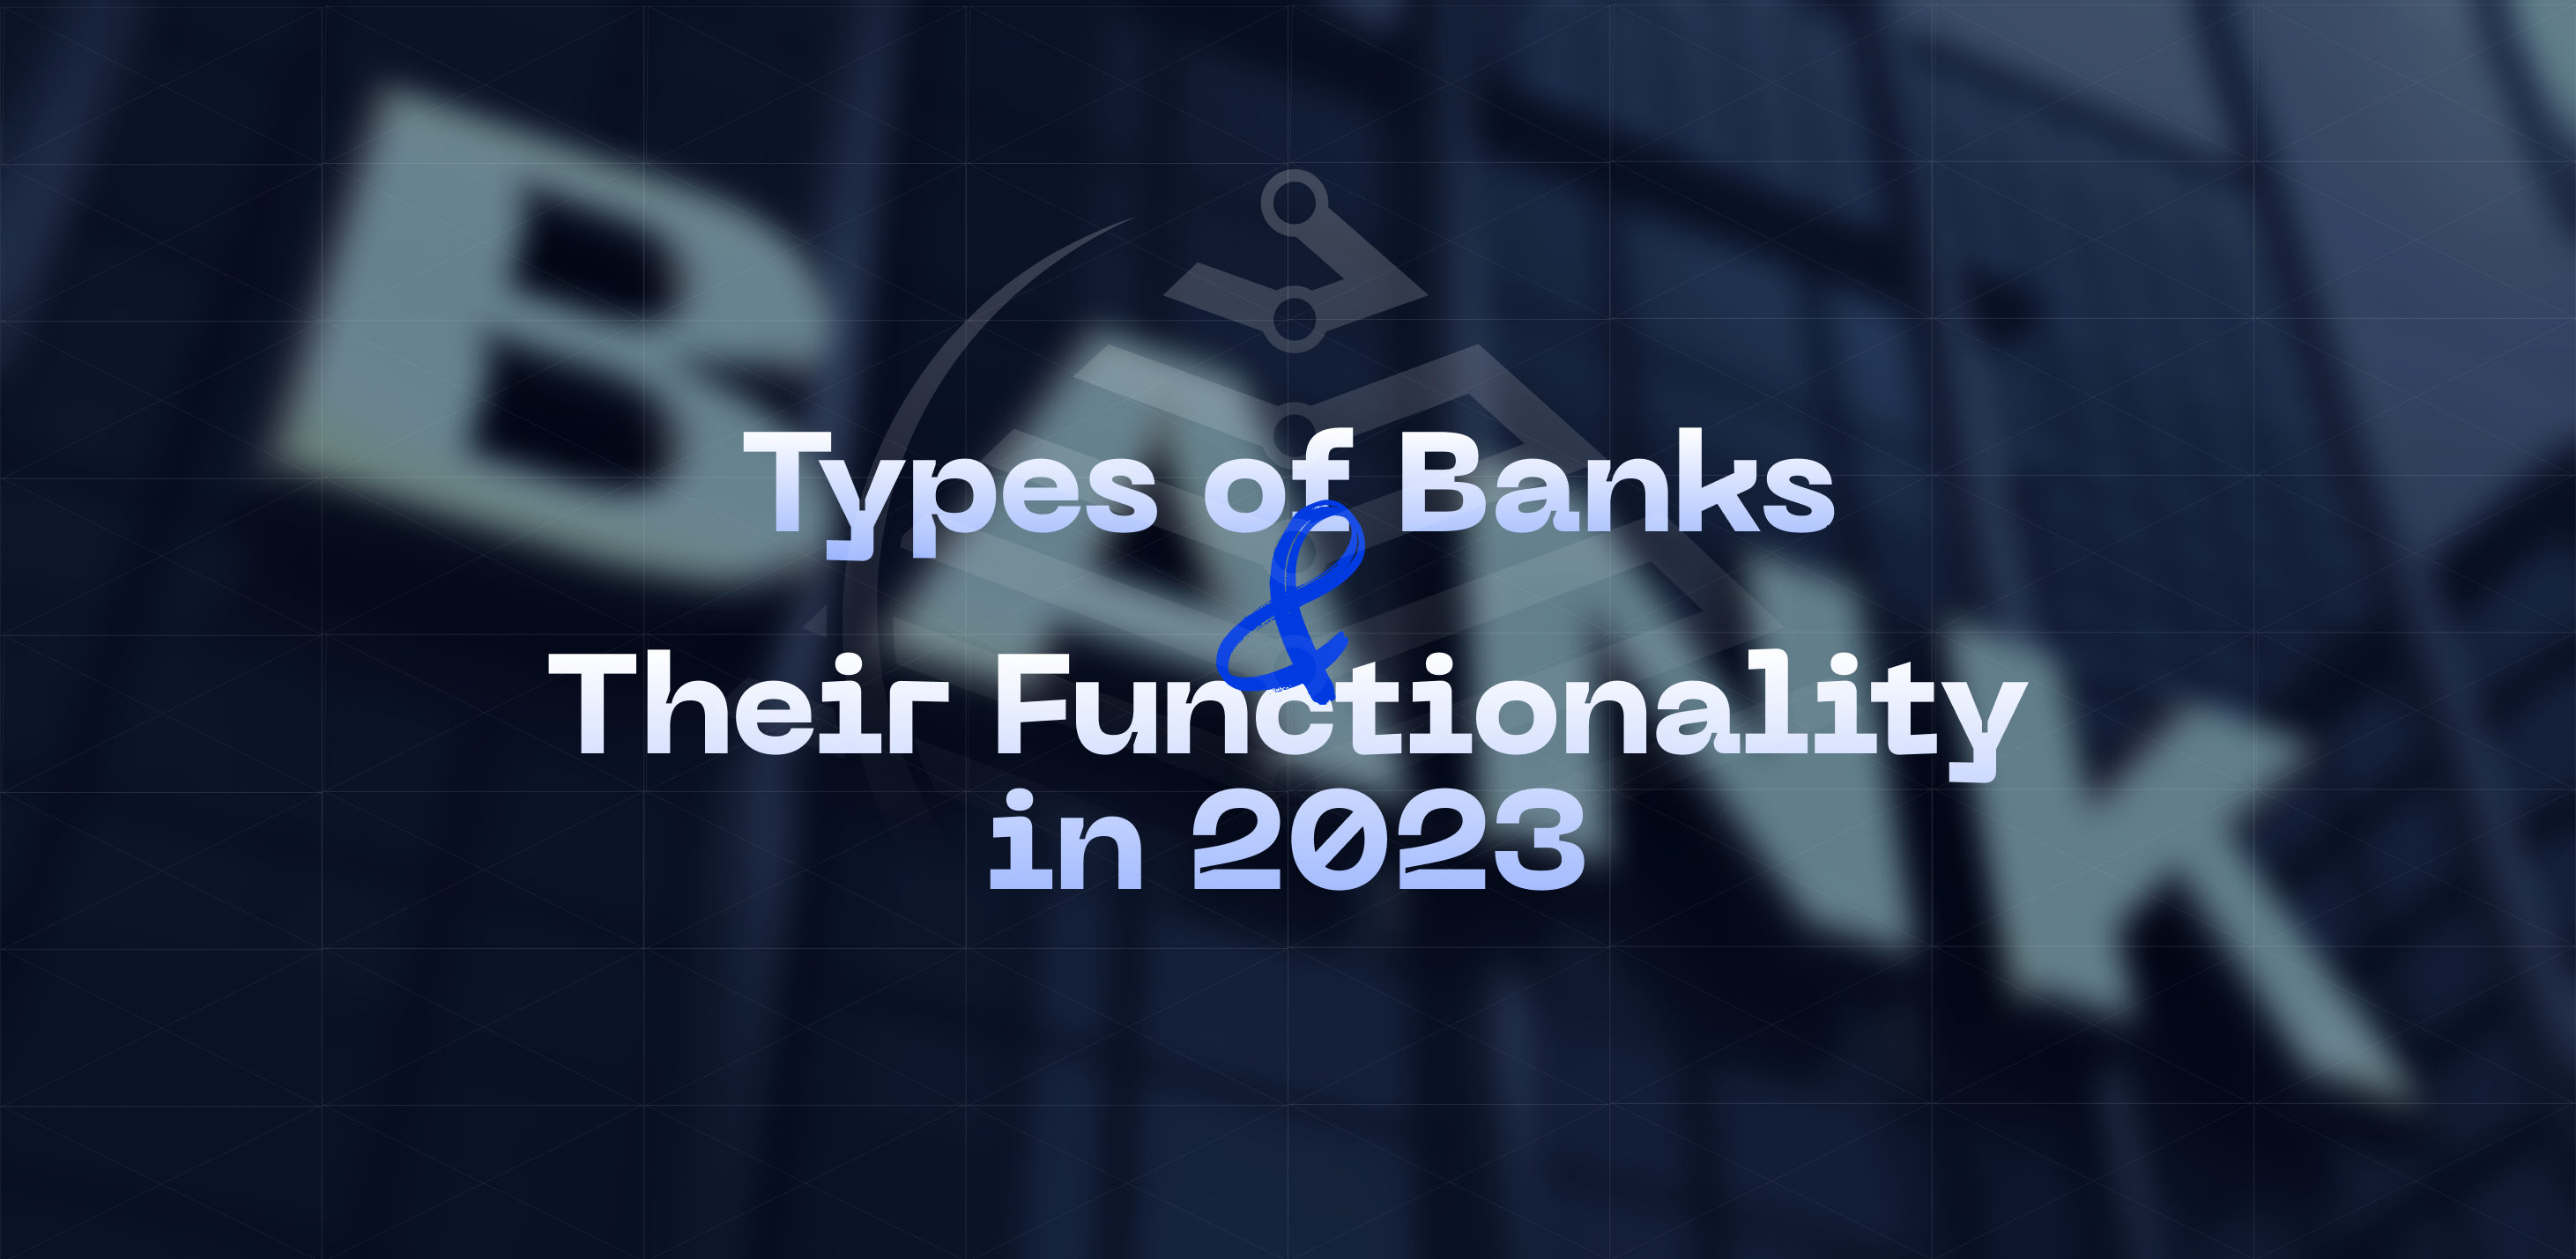 Types of Banks and Their Functionality in 2023